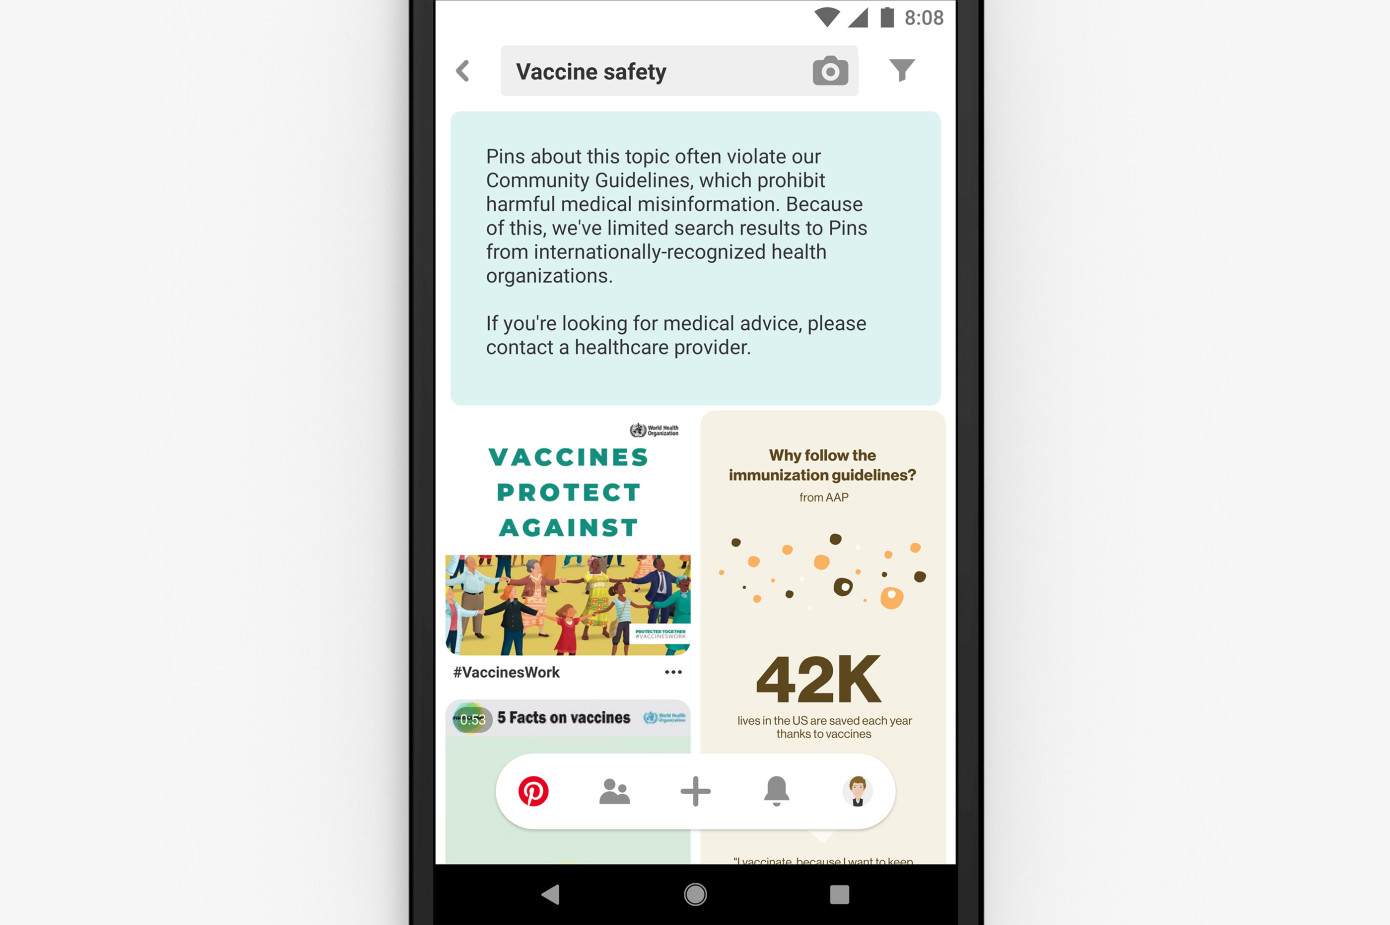 Pinterest begins displaying information from health organizations for vaccine-related searches